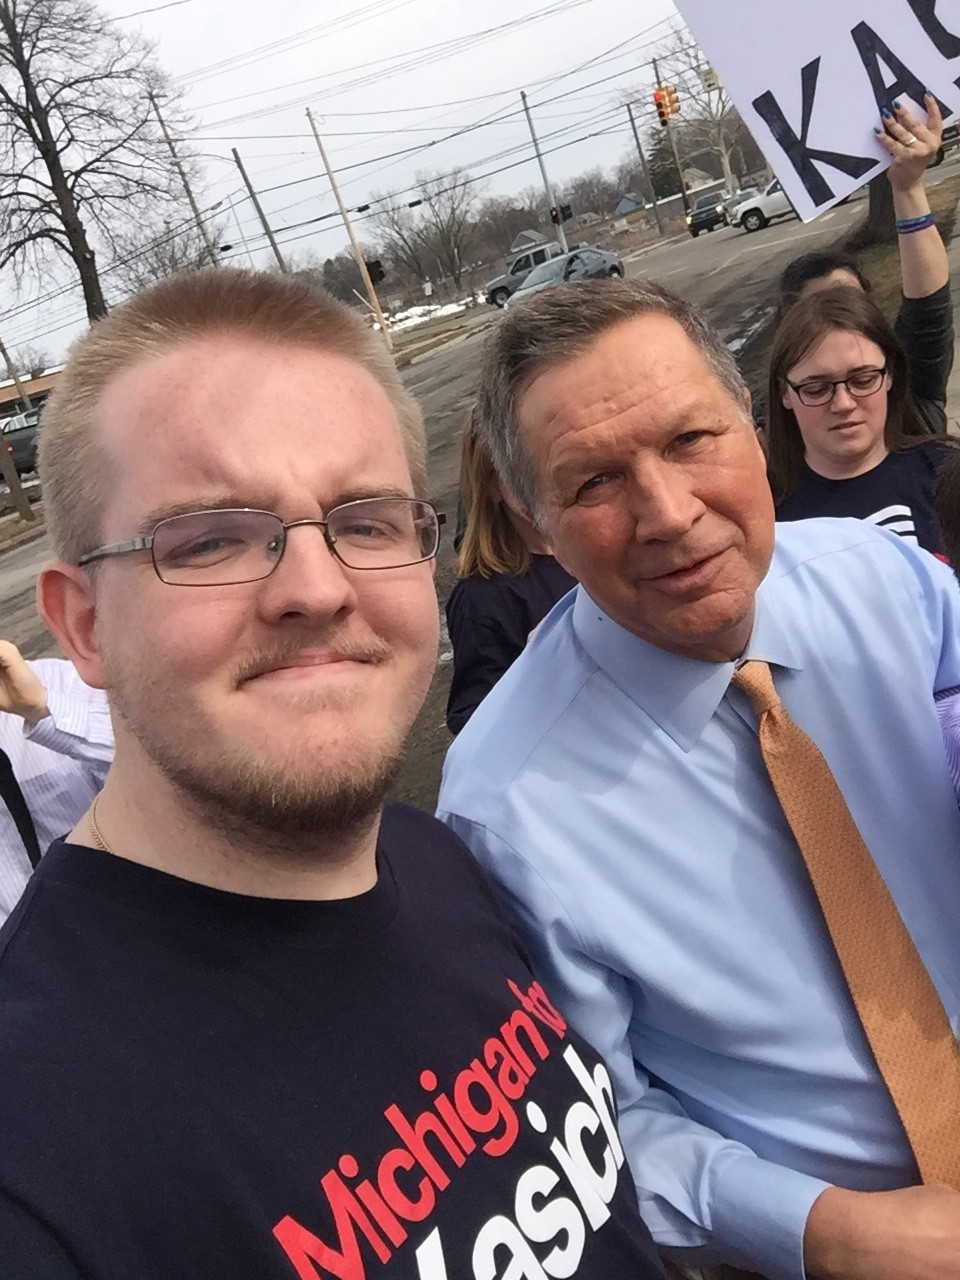 Thomas Ferrall snapped a selfie with John Kasich on the Ohio governor’s presidential campaign trail.